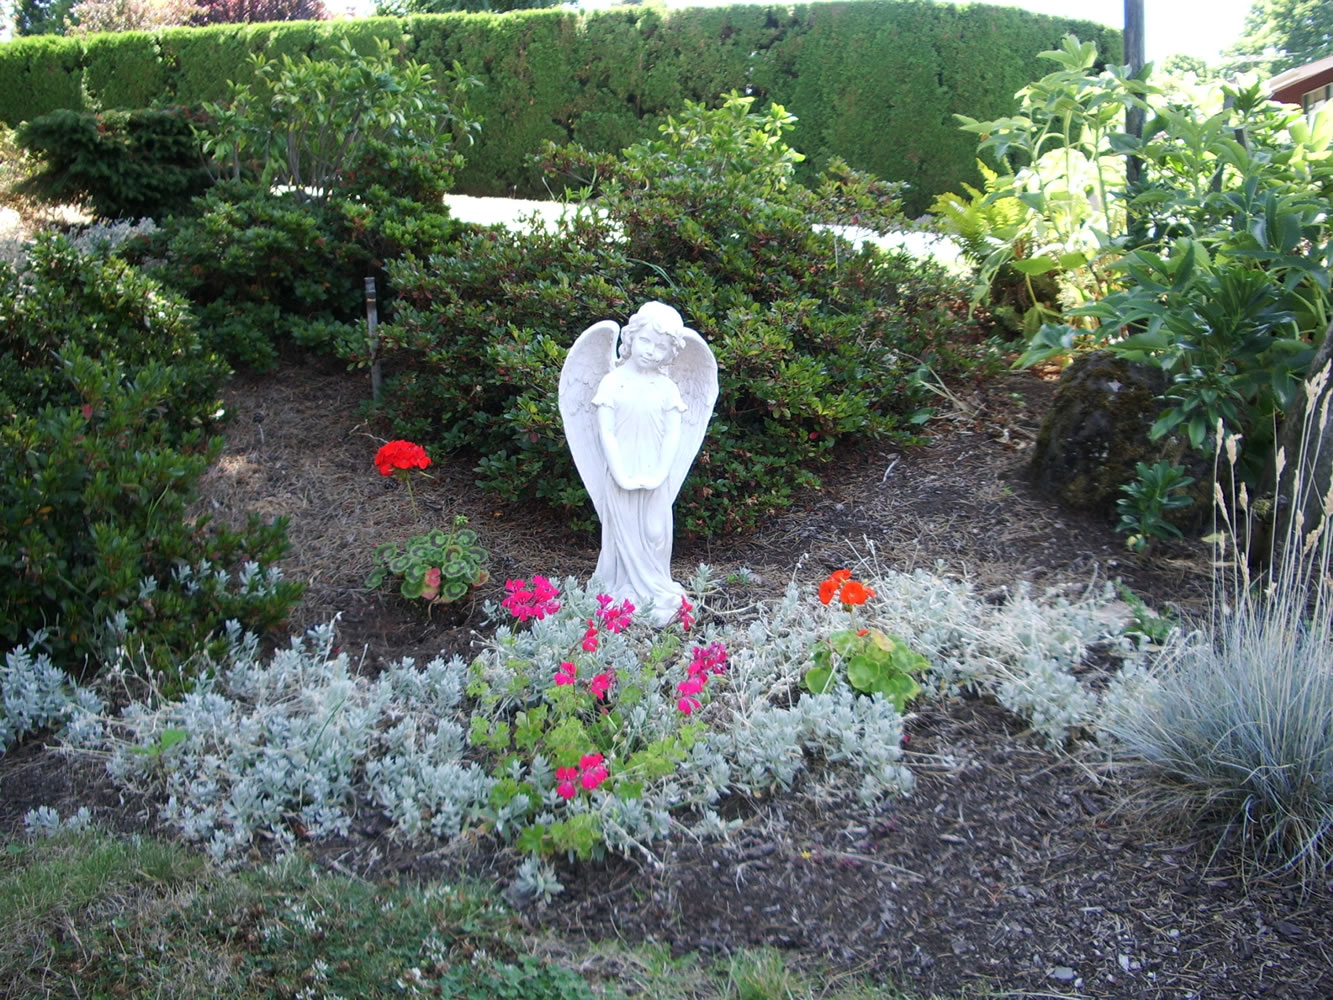 This ceramic garden angel went missing a few weeks ago from the front yard of 5311 N.W. Walnut St. It was a reminder to the Ernesti family of Adella Ernesti, who had amassed a collection of nearly 400 angels before she died in 2009. She would have turned 90 on Dec.